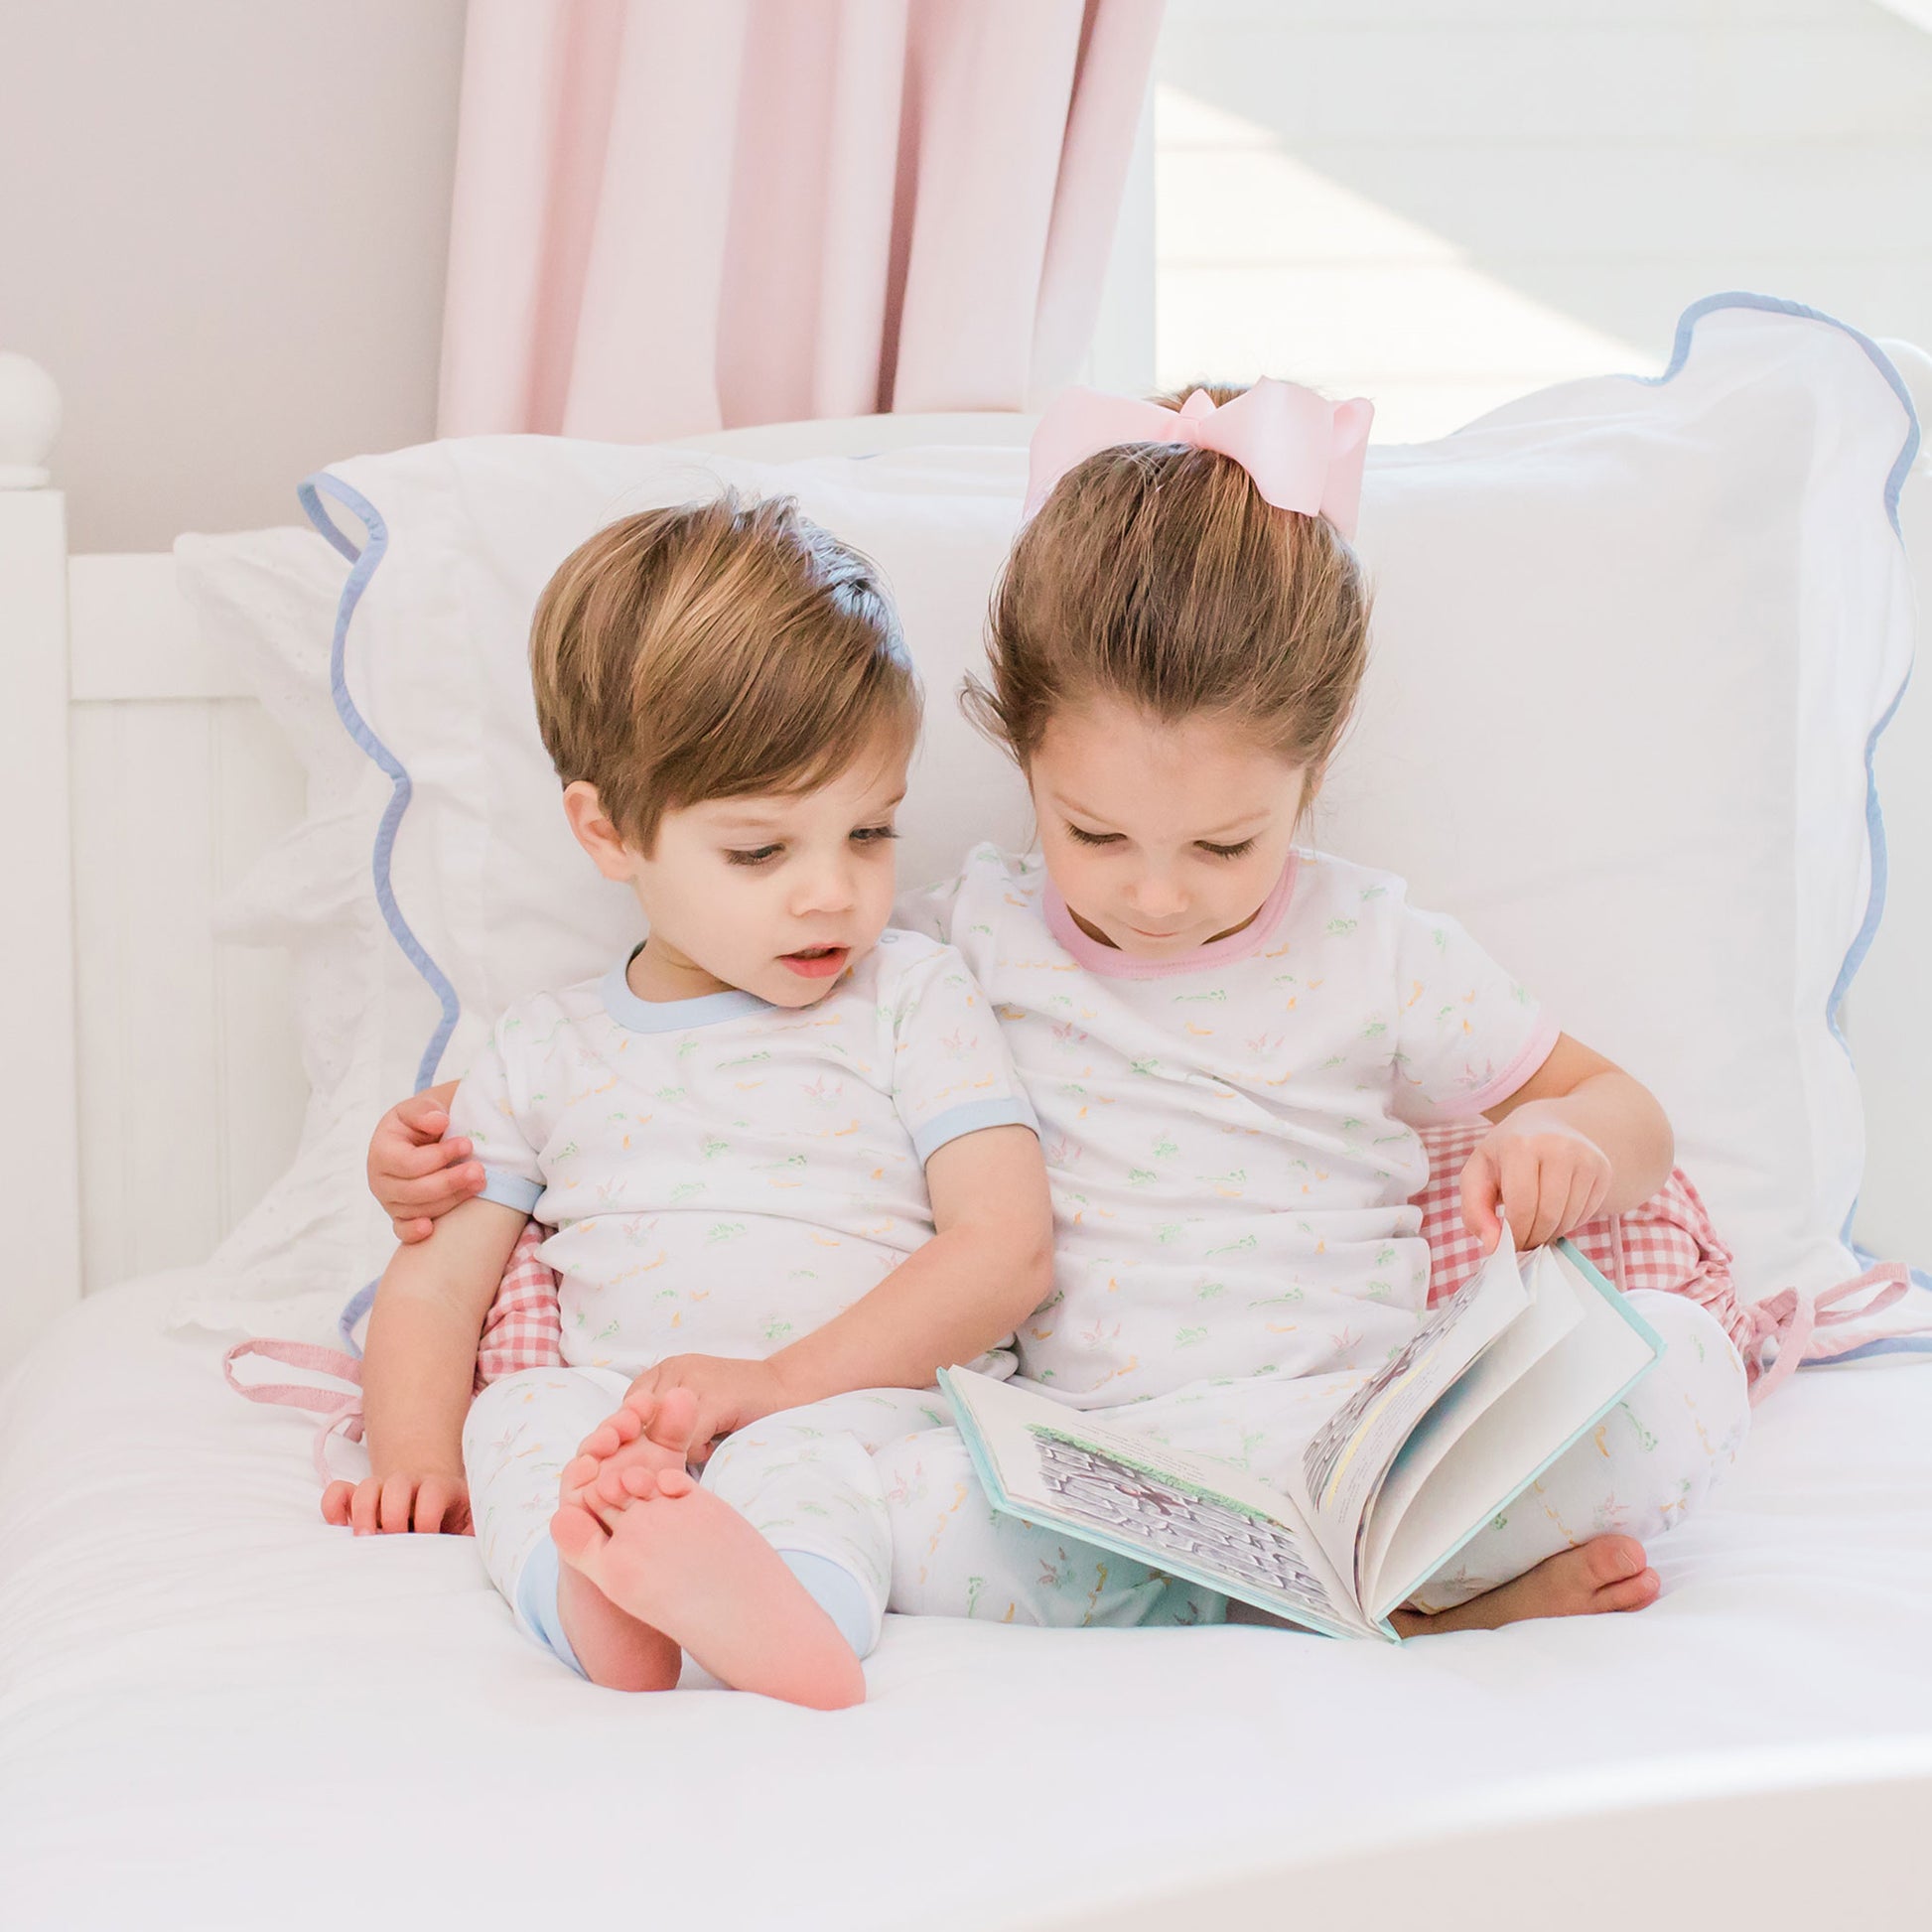 little boy and little girl reading a book on a bed